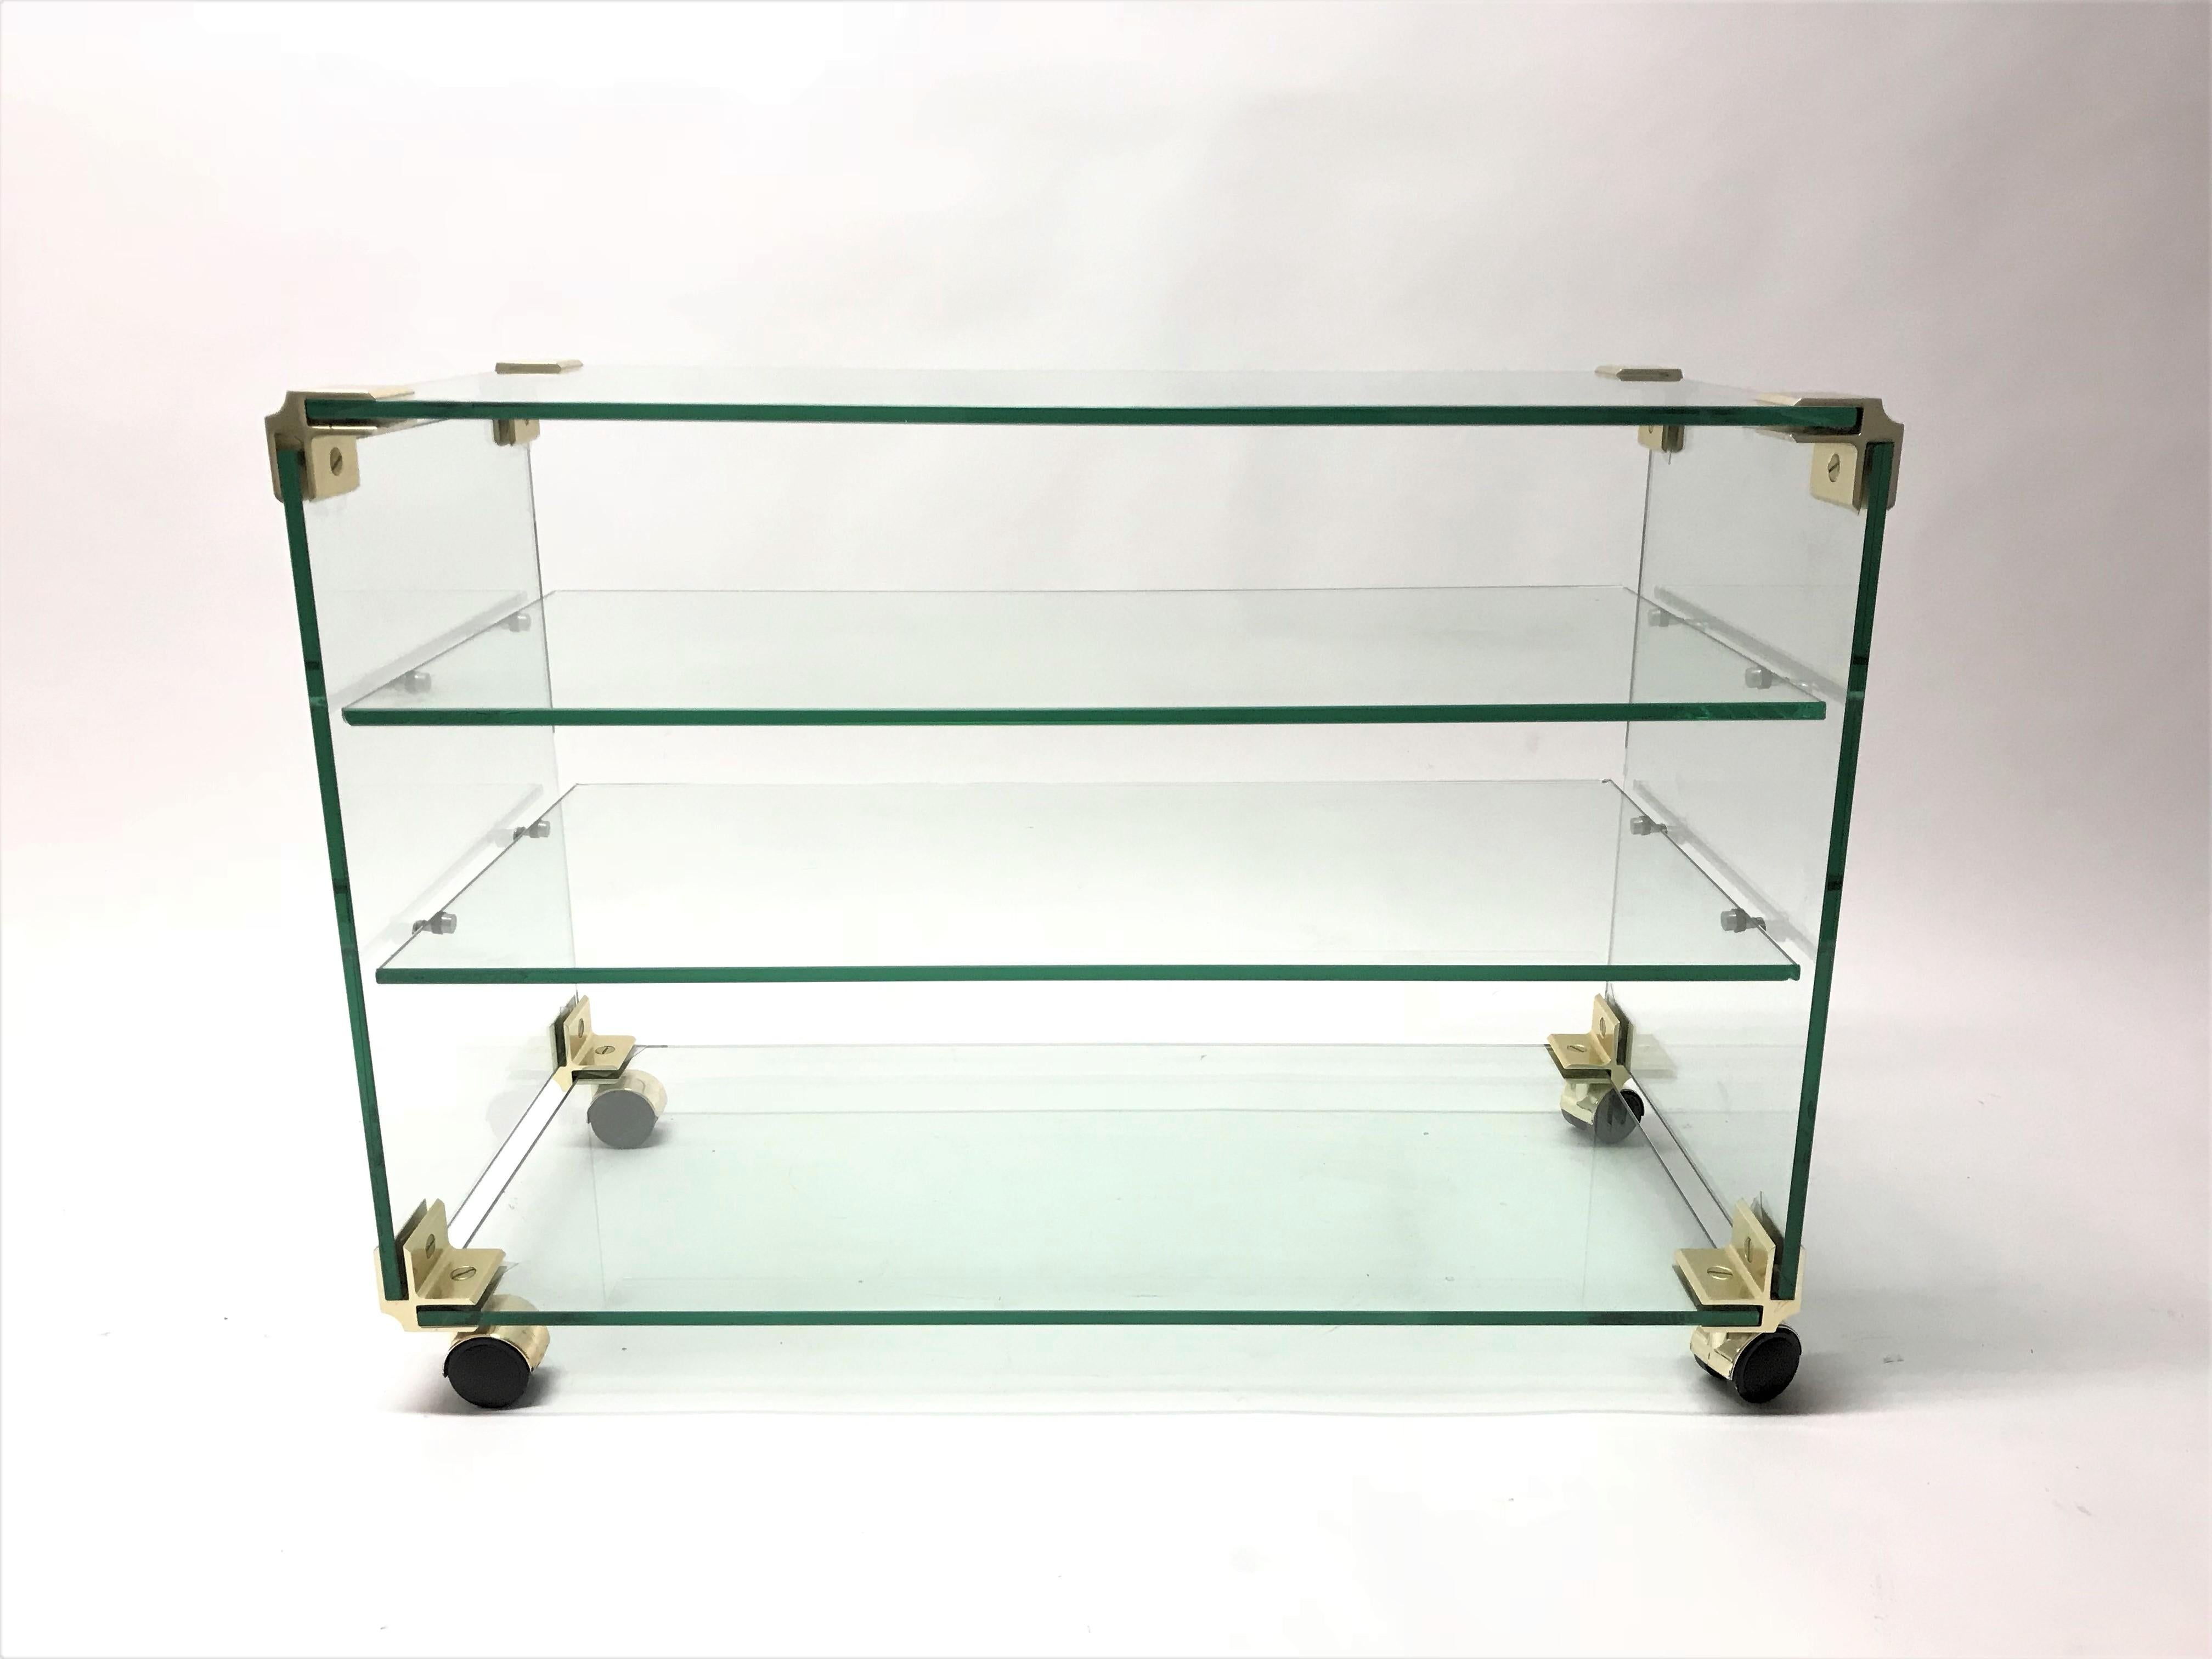 Regency style brass and glass trolley.

The trolley consists of two glass shelves in the middle, the bottom and top make a total of 4 shelves.

Ideal to use as a side table, serving trolley or as a television table.

The manufacturer/designer